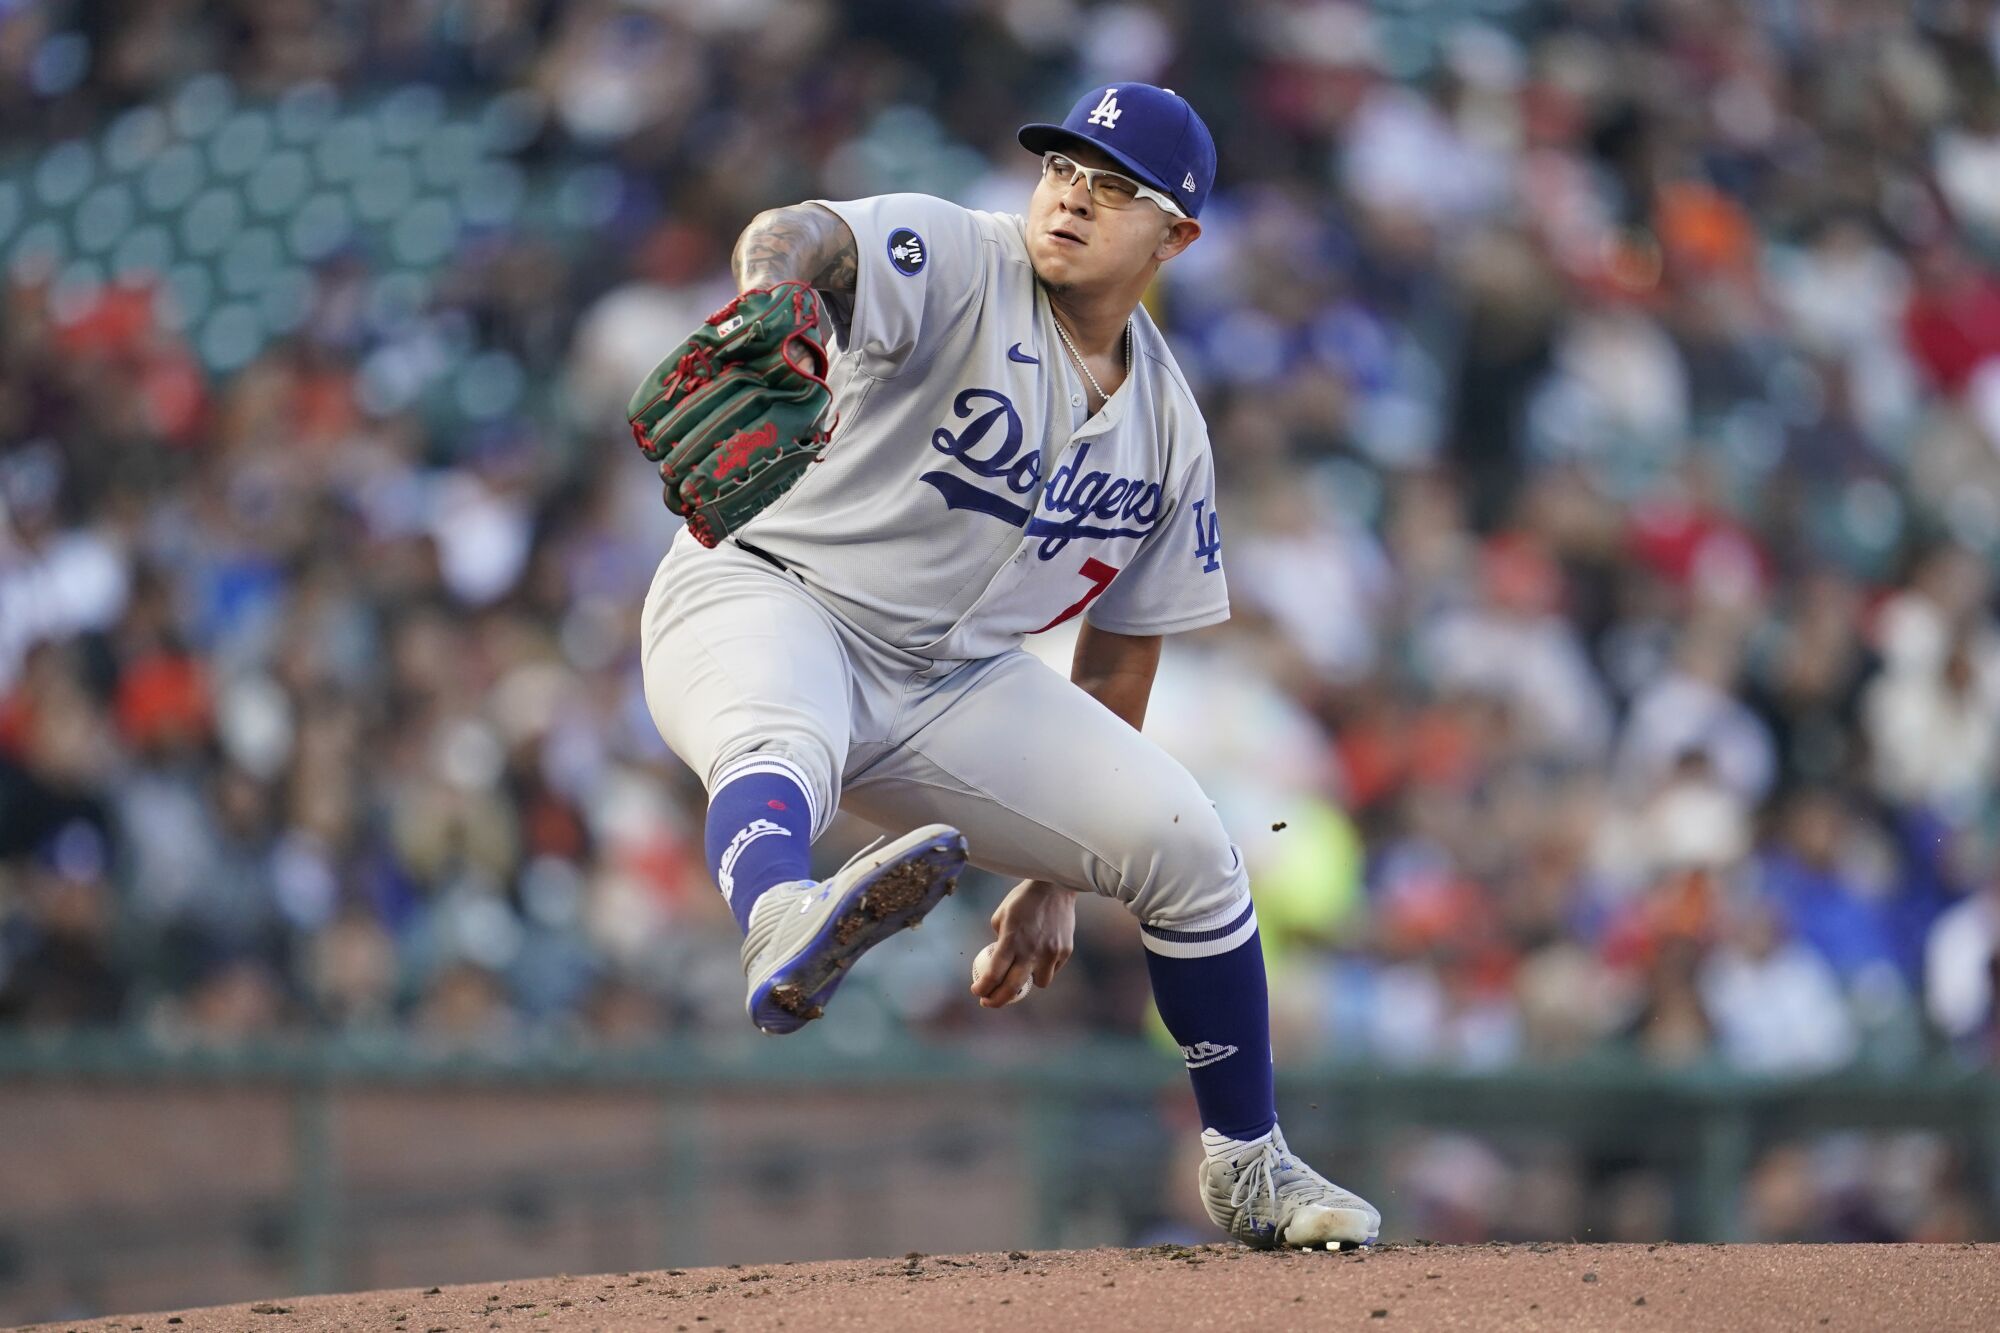 Julio Urías pitches against the Giants on Aug. 3 in San Francisco.